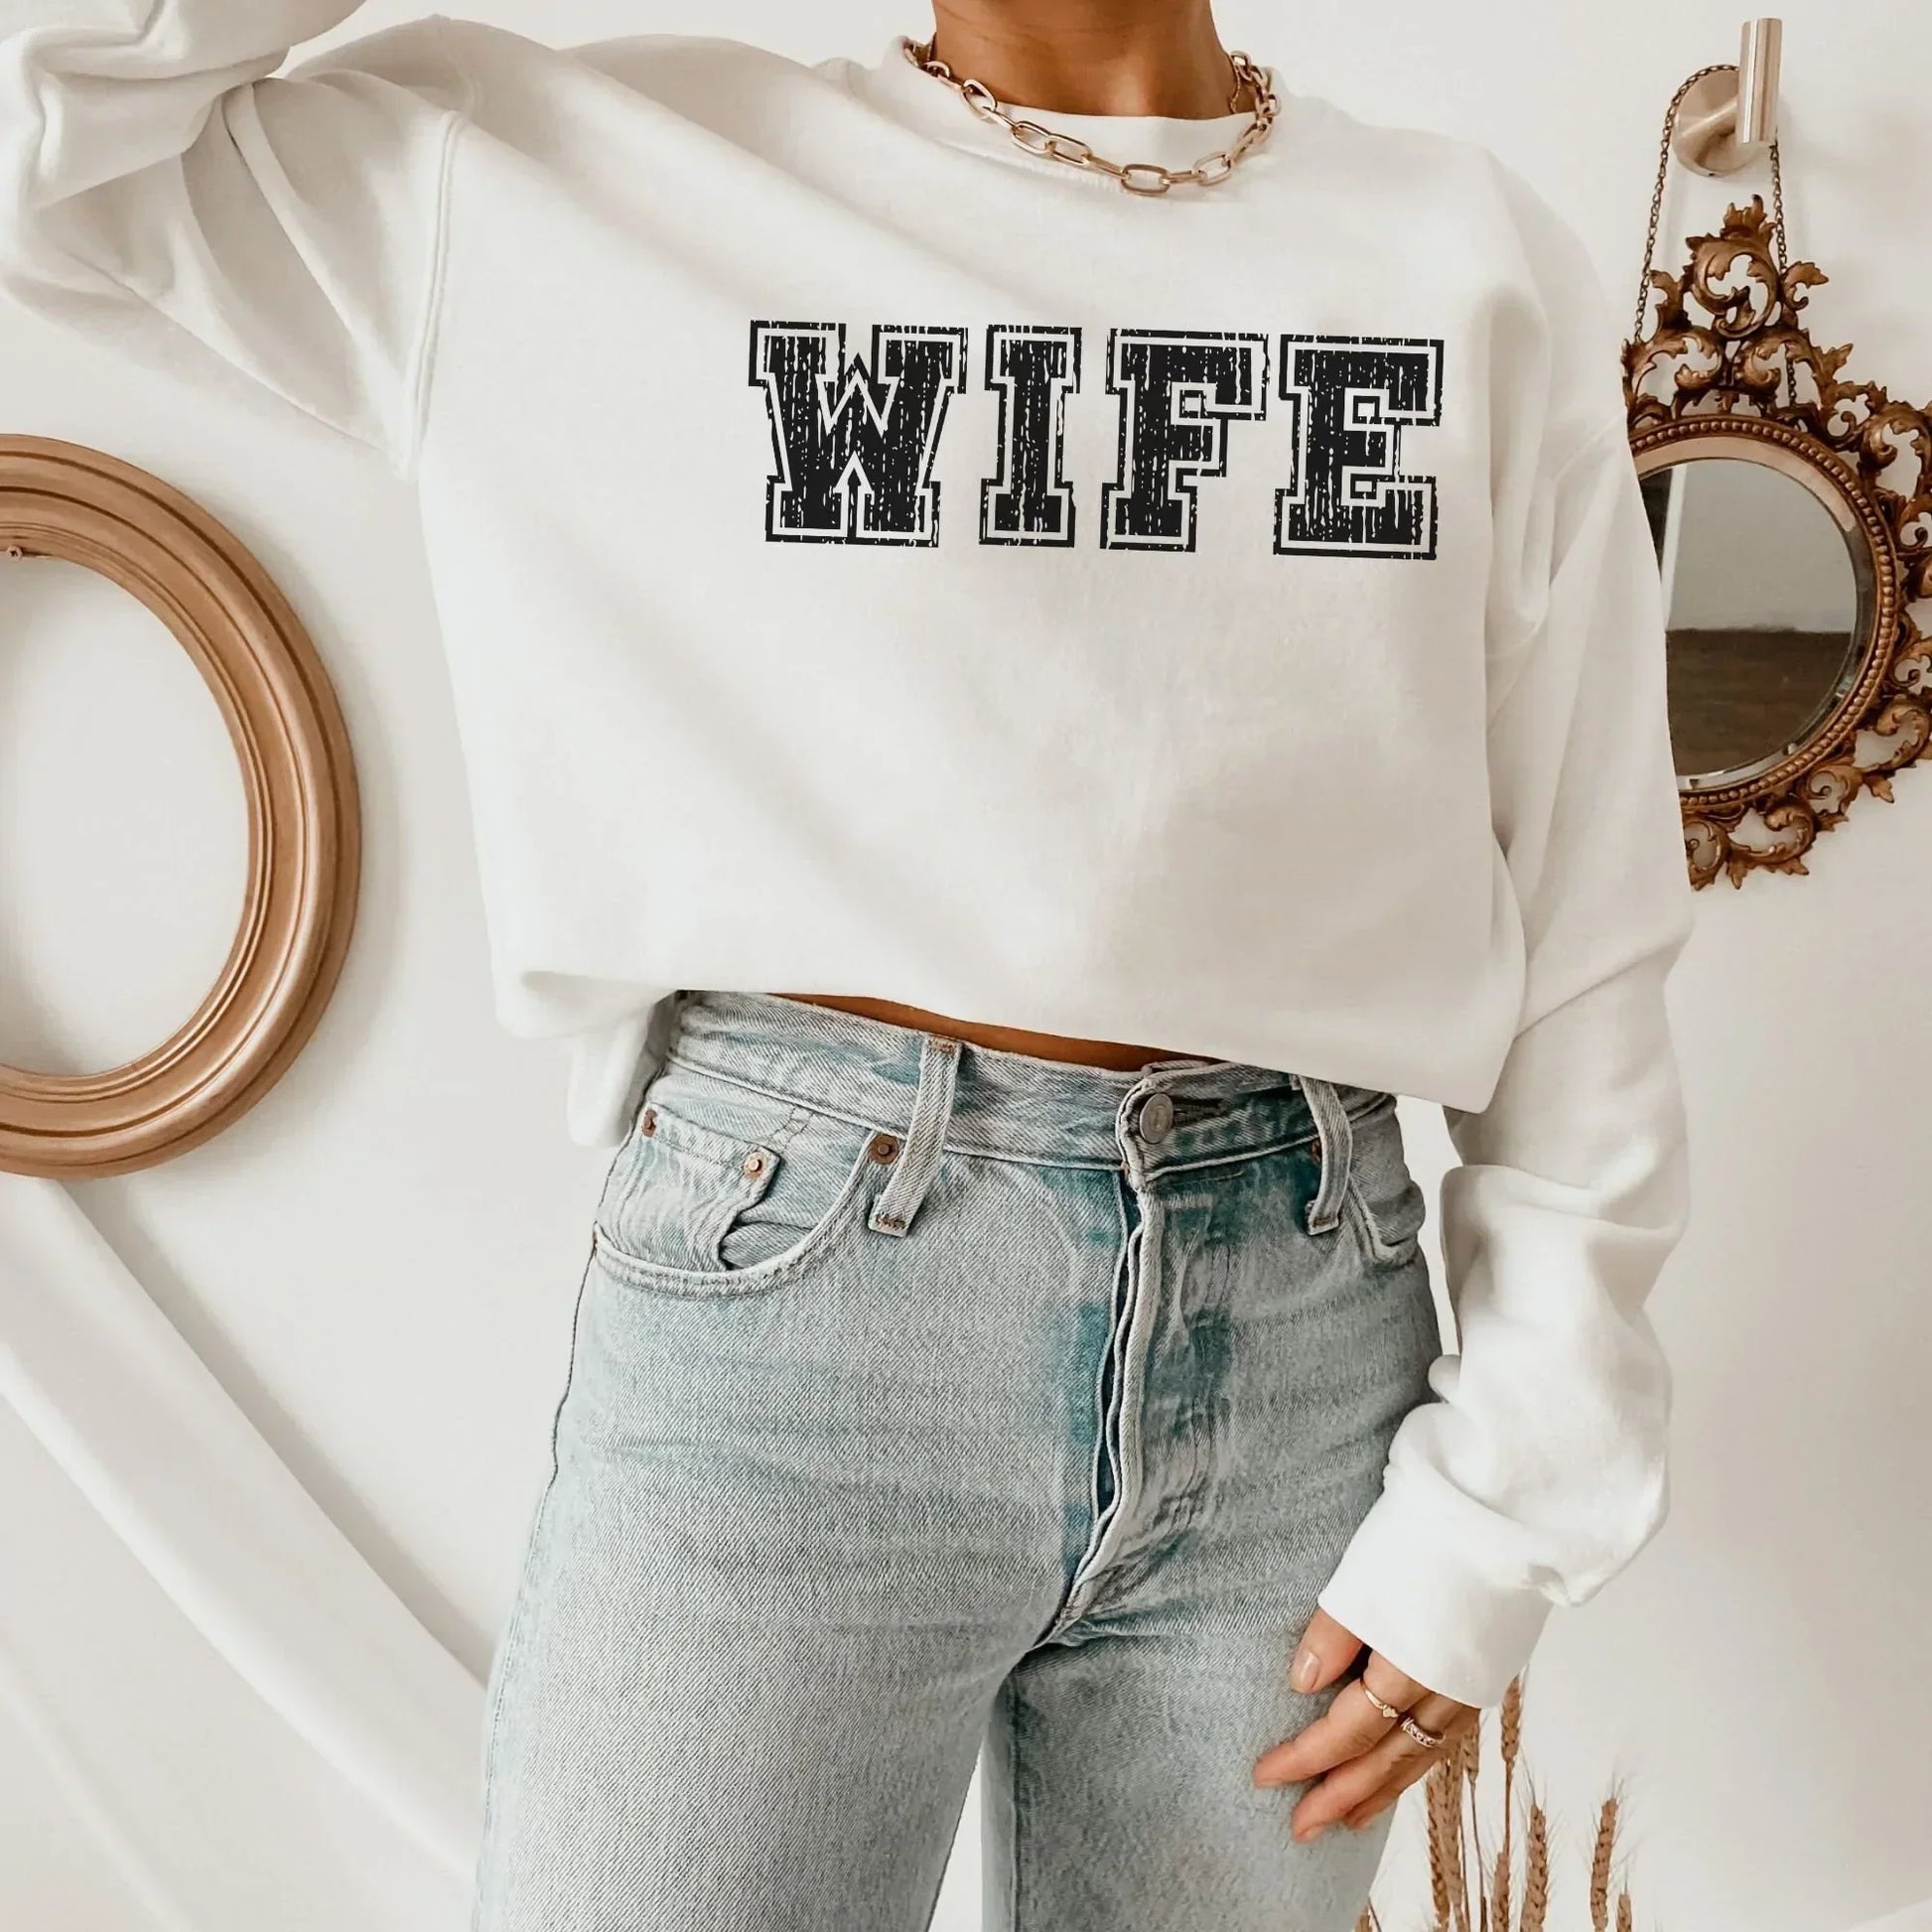 Wife Sweatshirt, Newly Married Sweater, Getting Ready Outfit, Future Mrs, Team Bride Shirt, Wife Hoodie, Gift for Bride, Crewneck Sweater